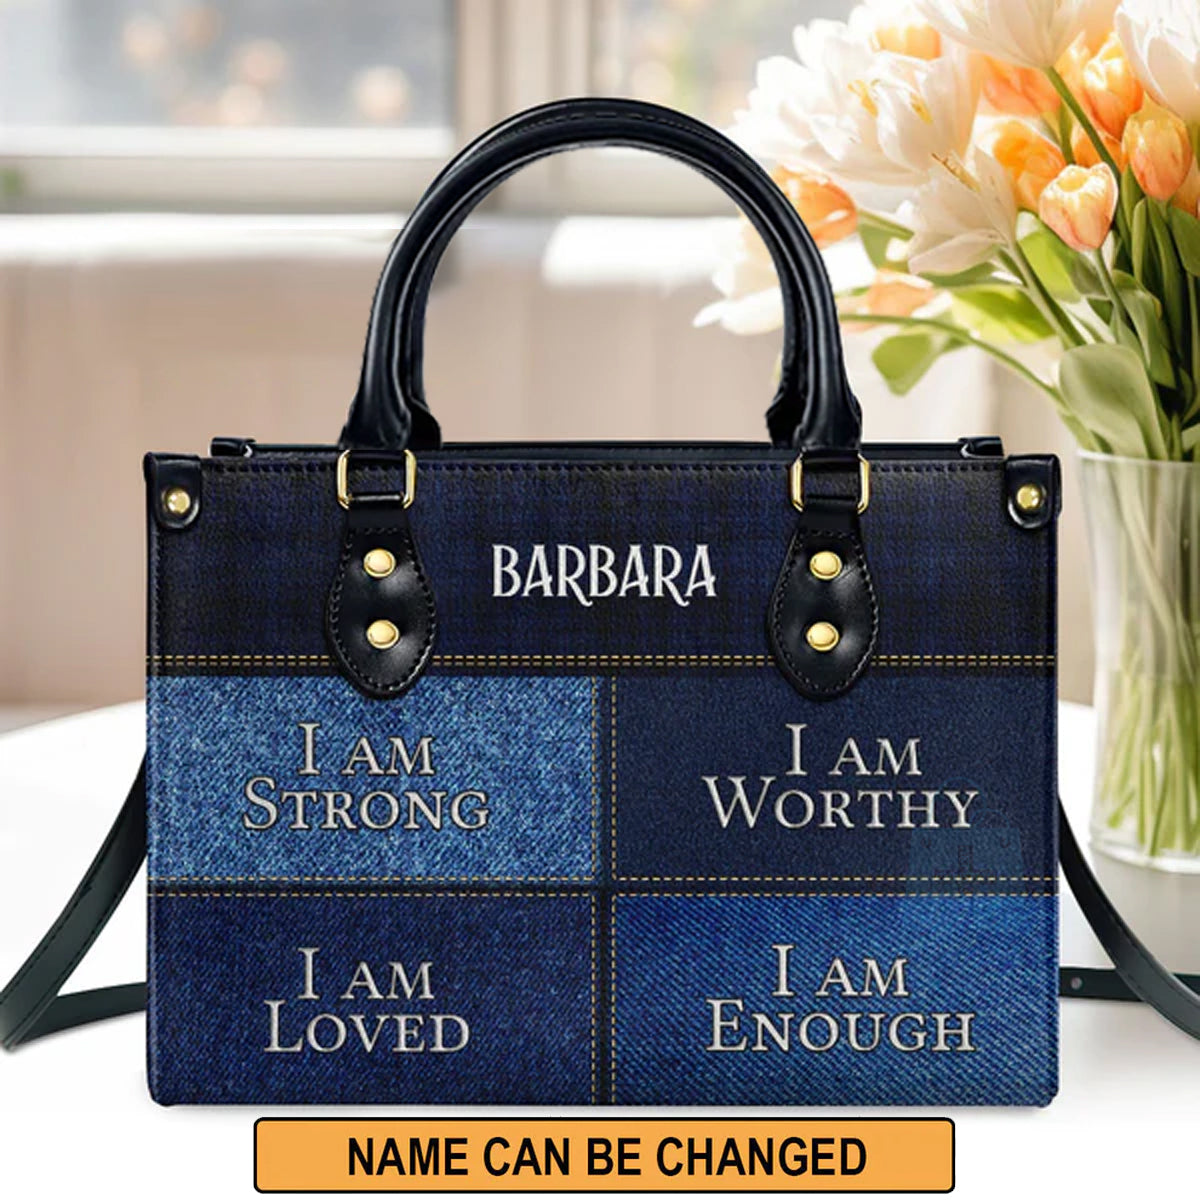 Christianartbag Handbags, I Am Strong, I Am Worthy, Personalized Bags, Gifts for Women, Christmas Gift, CABLTB02290723. - Christian Art Bag